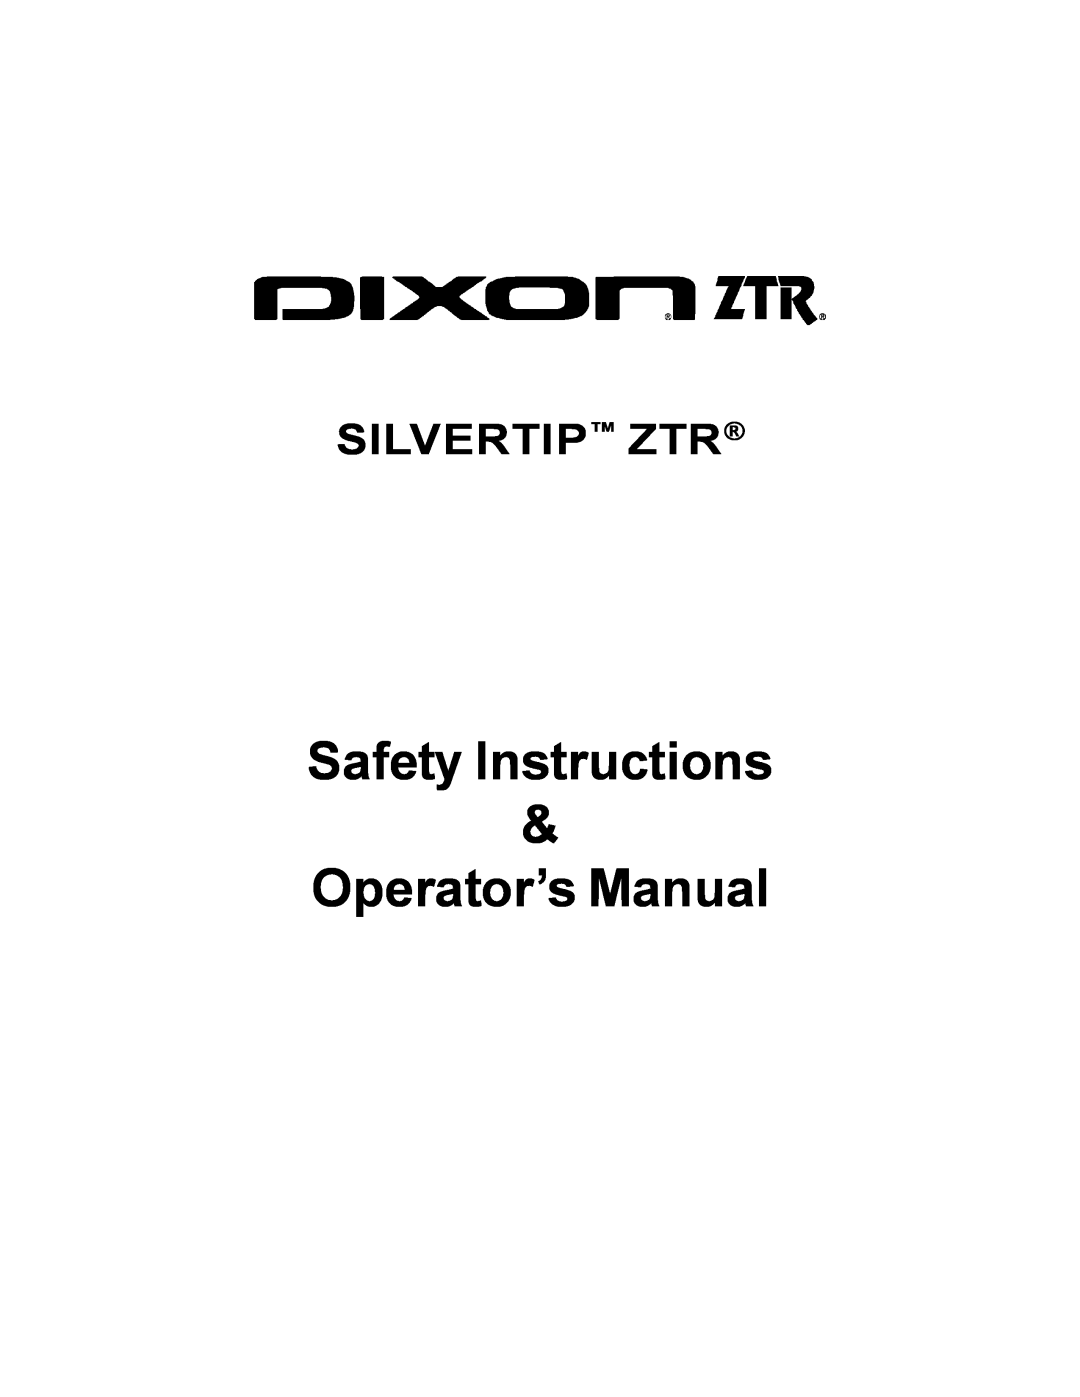 Dixon 12881-106 manual Safety Instructions, Operator’s Manual, Silvertip Ztr 